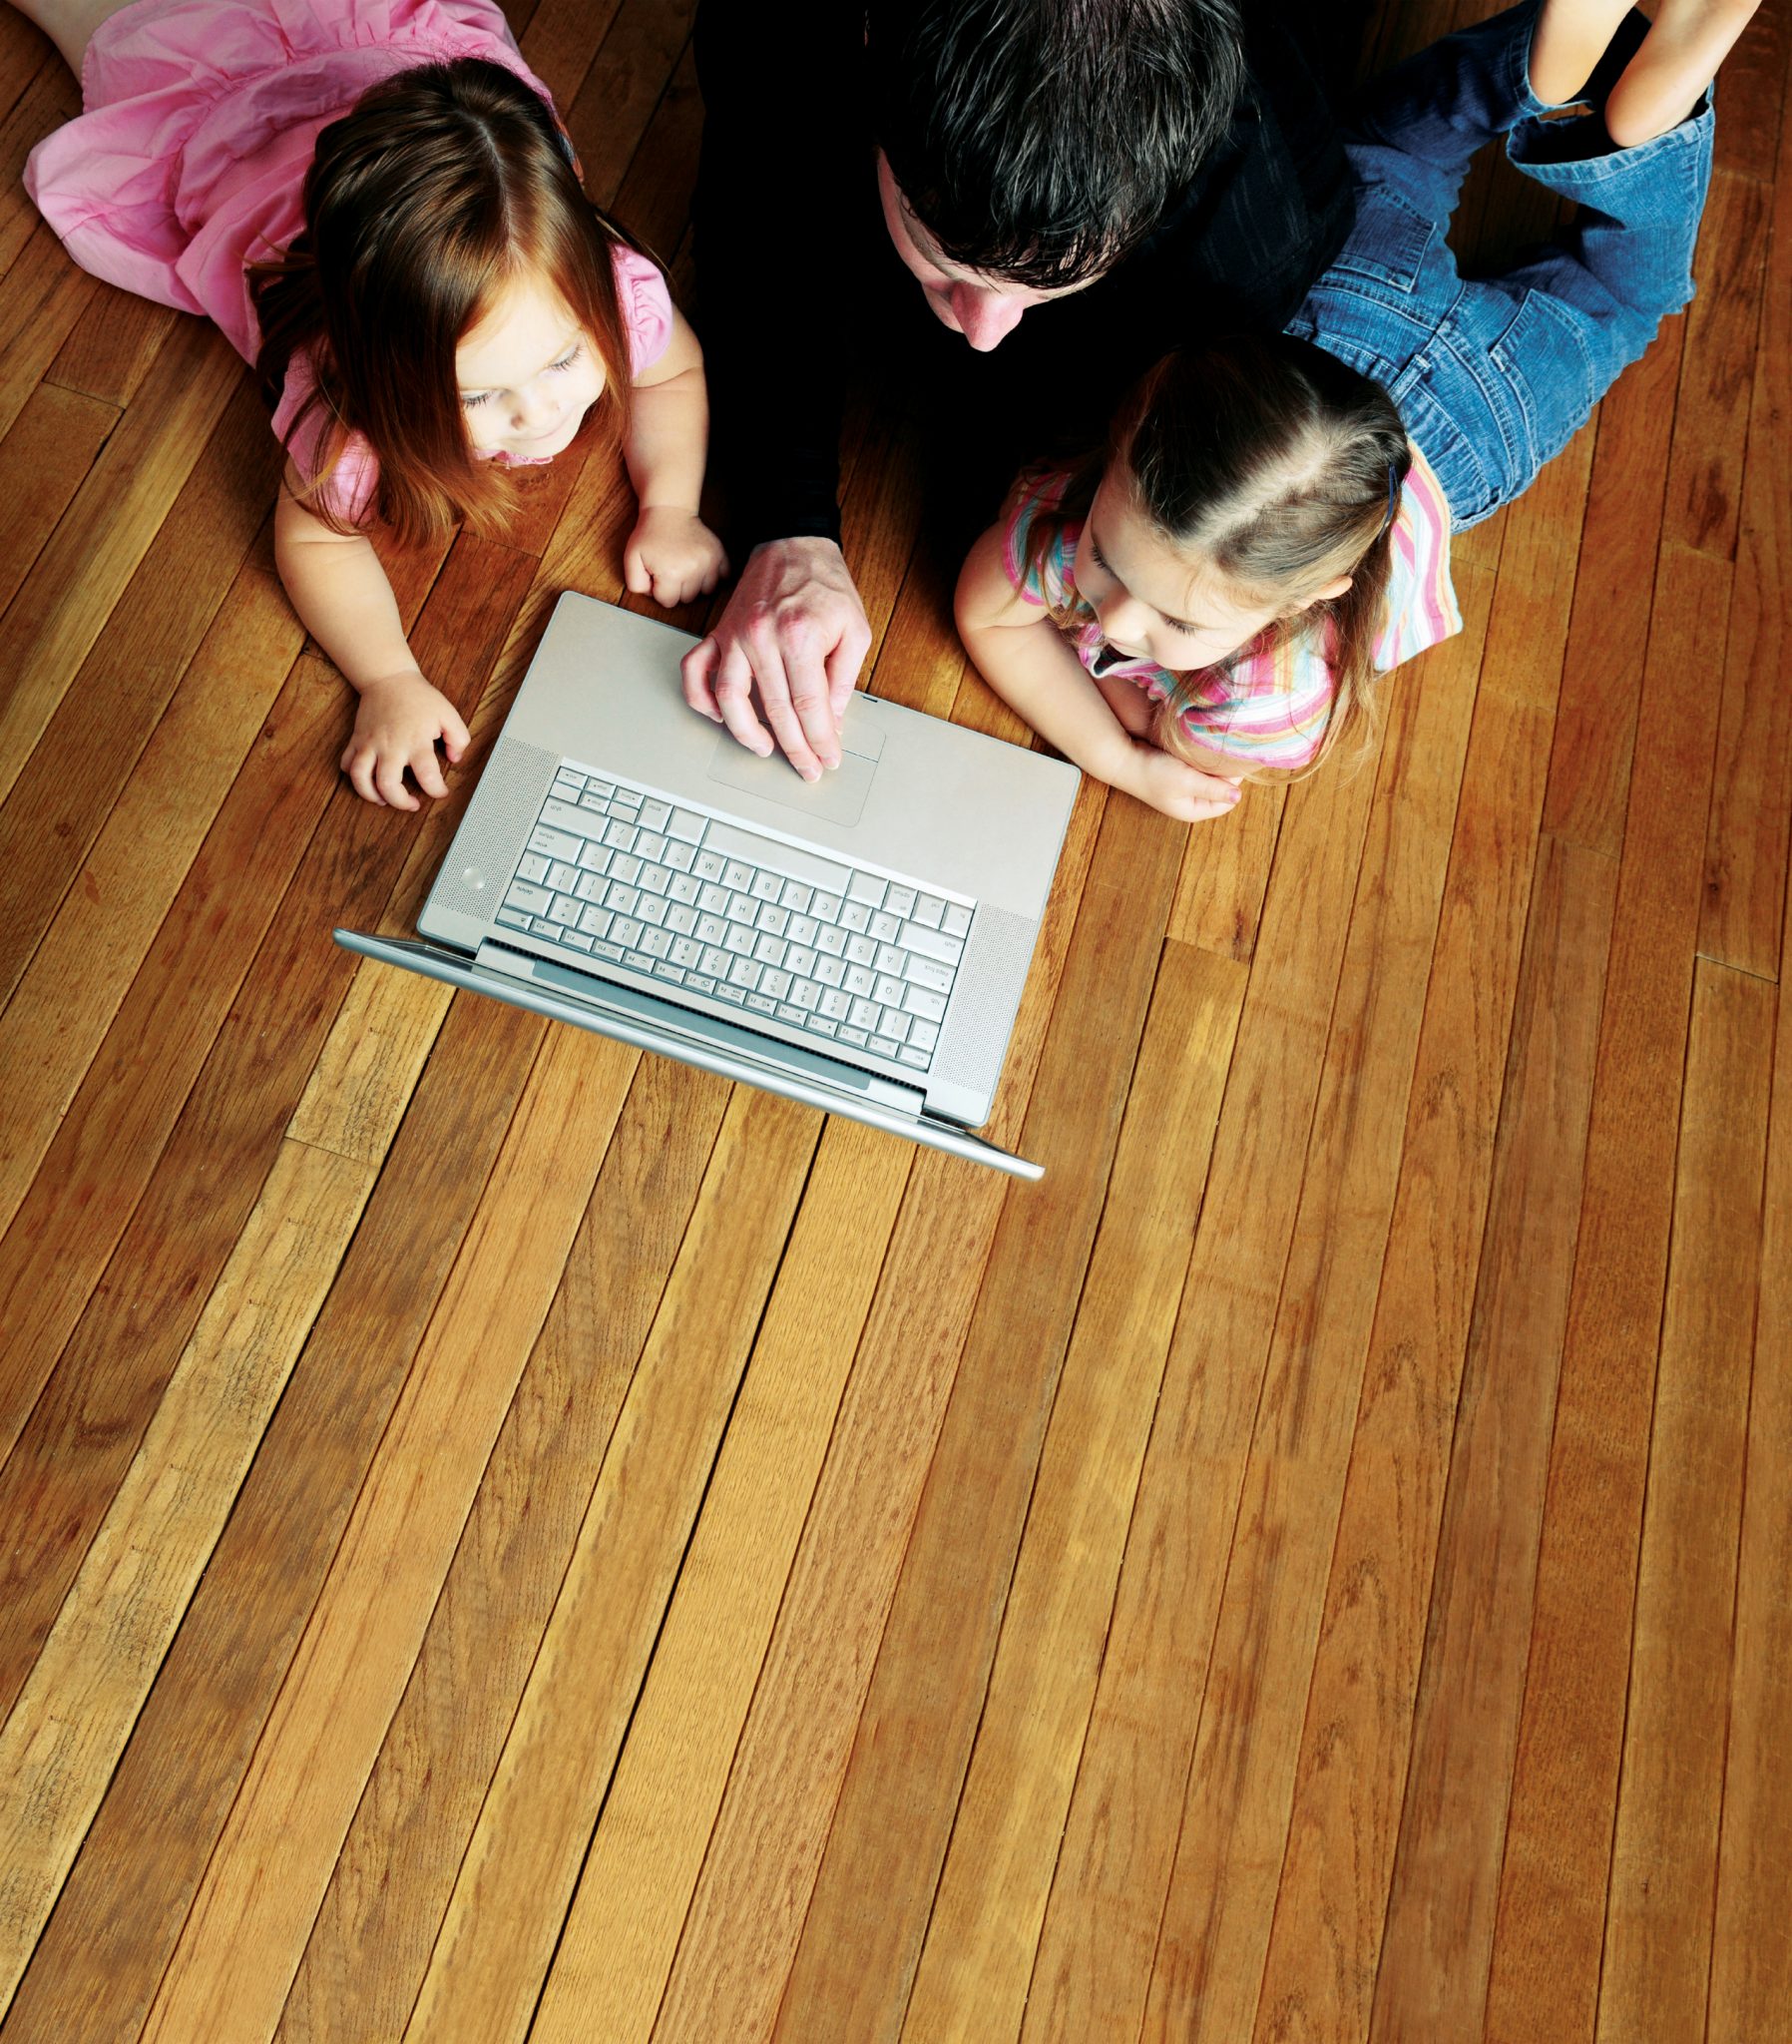 A dad and two girls look lie on a hardwood floor and watch something on a laptop